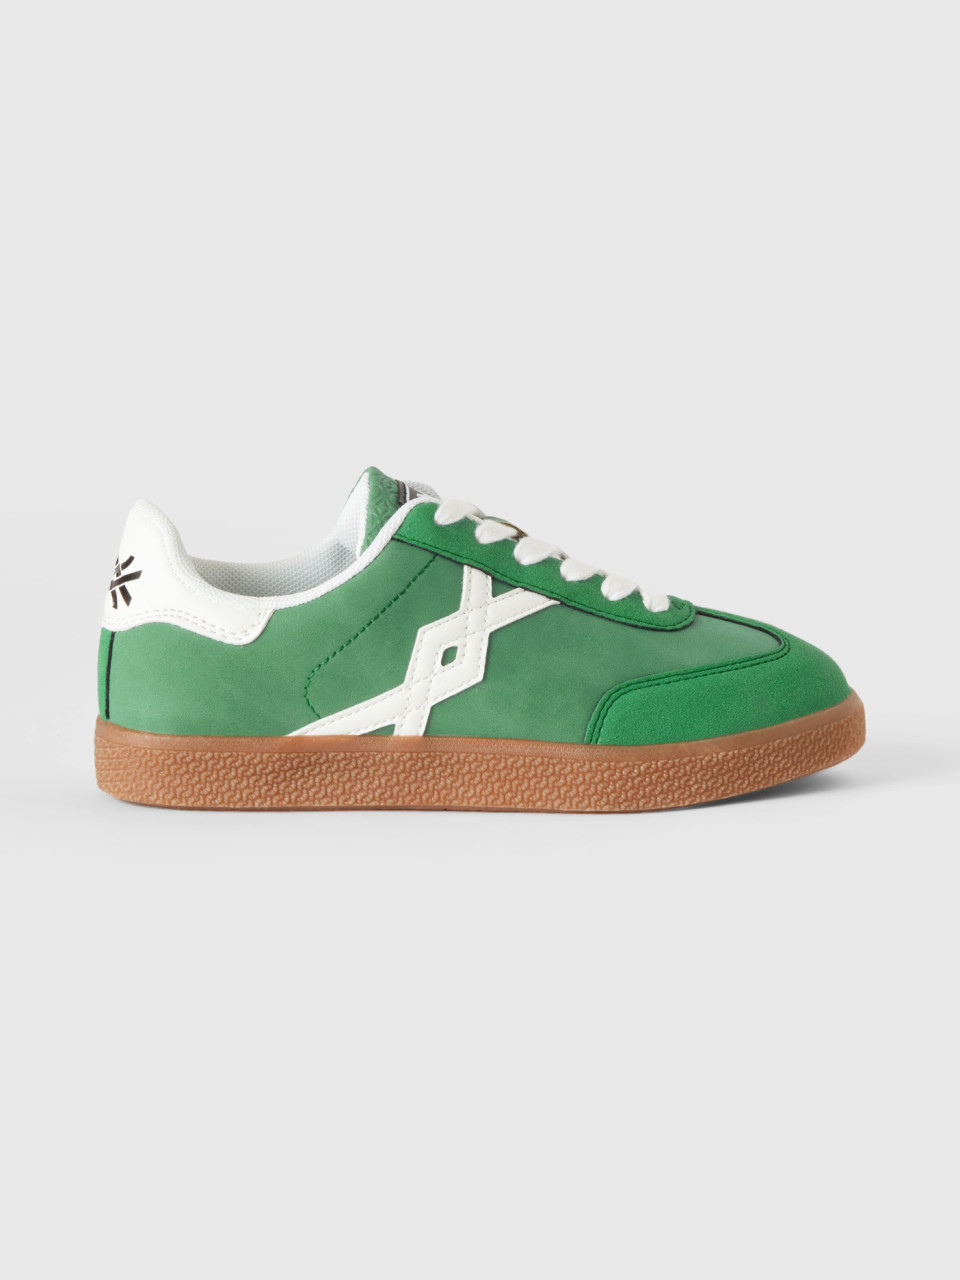 Benetton, Sneakers In Imitation Leather,5C, Green